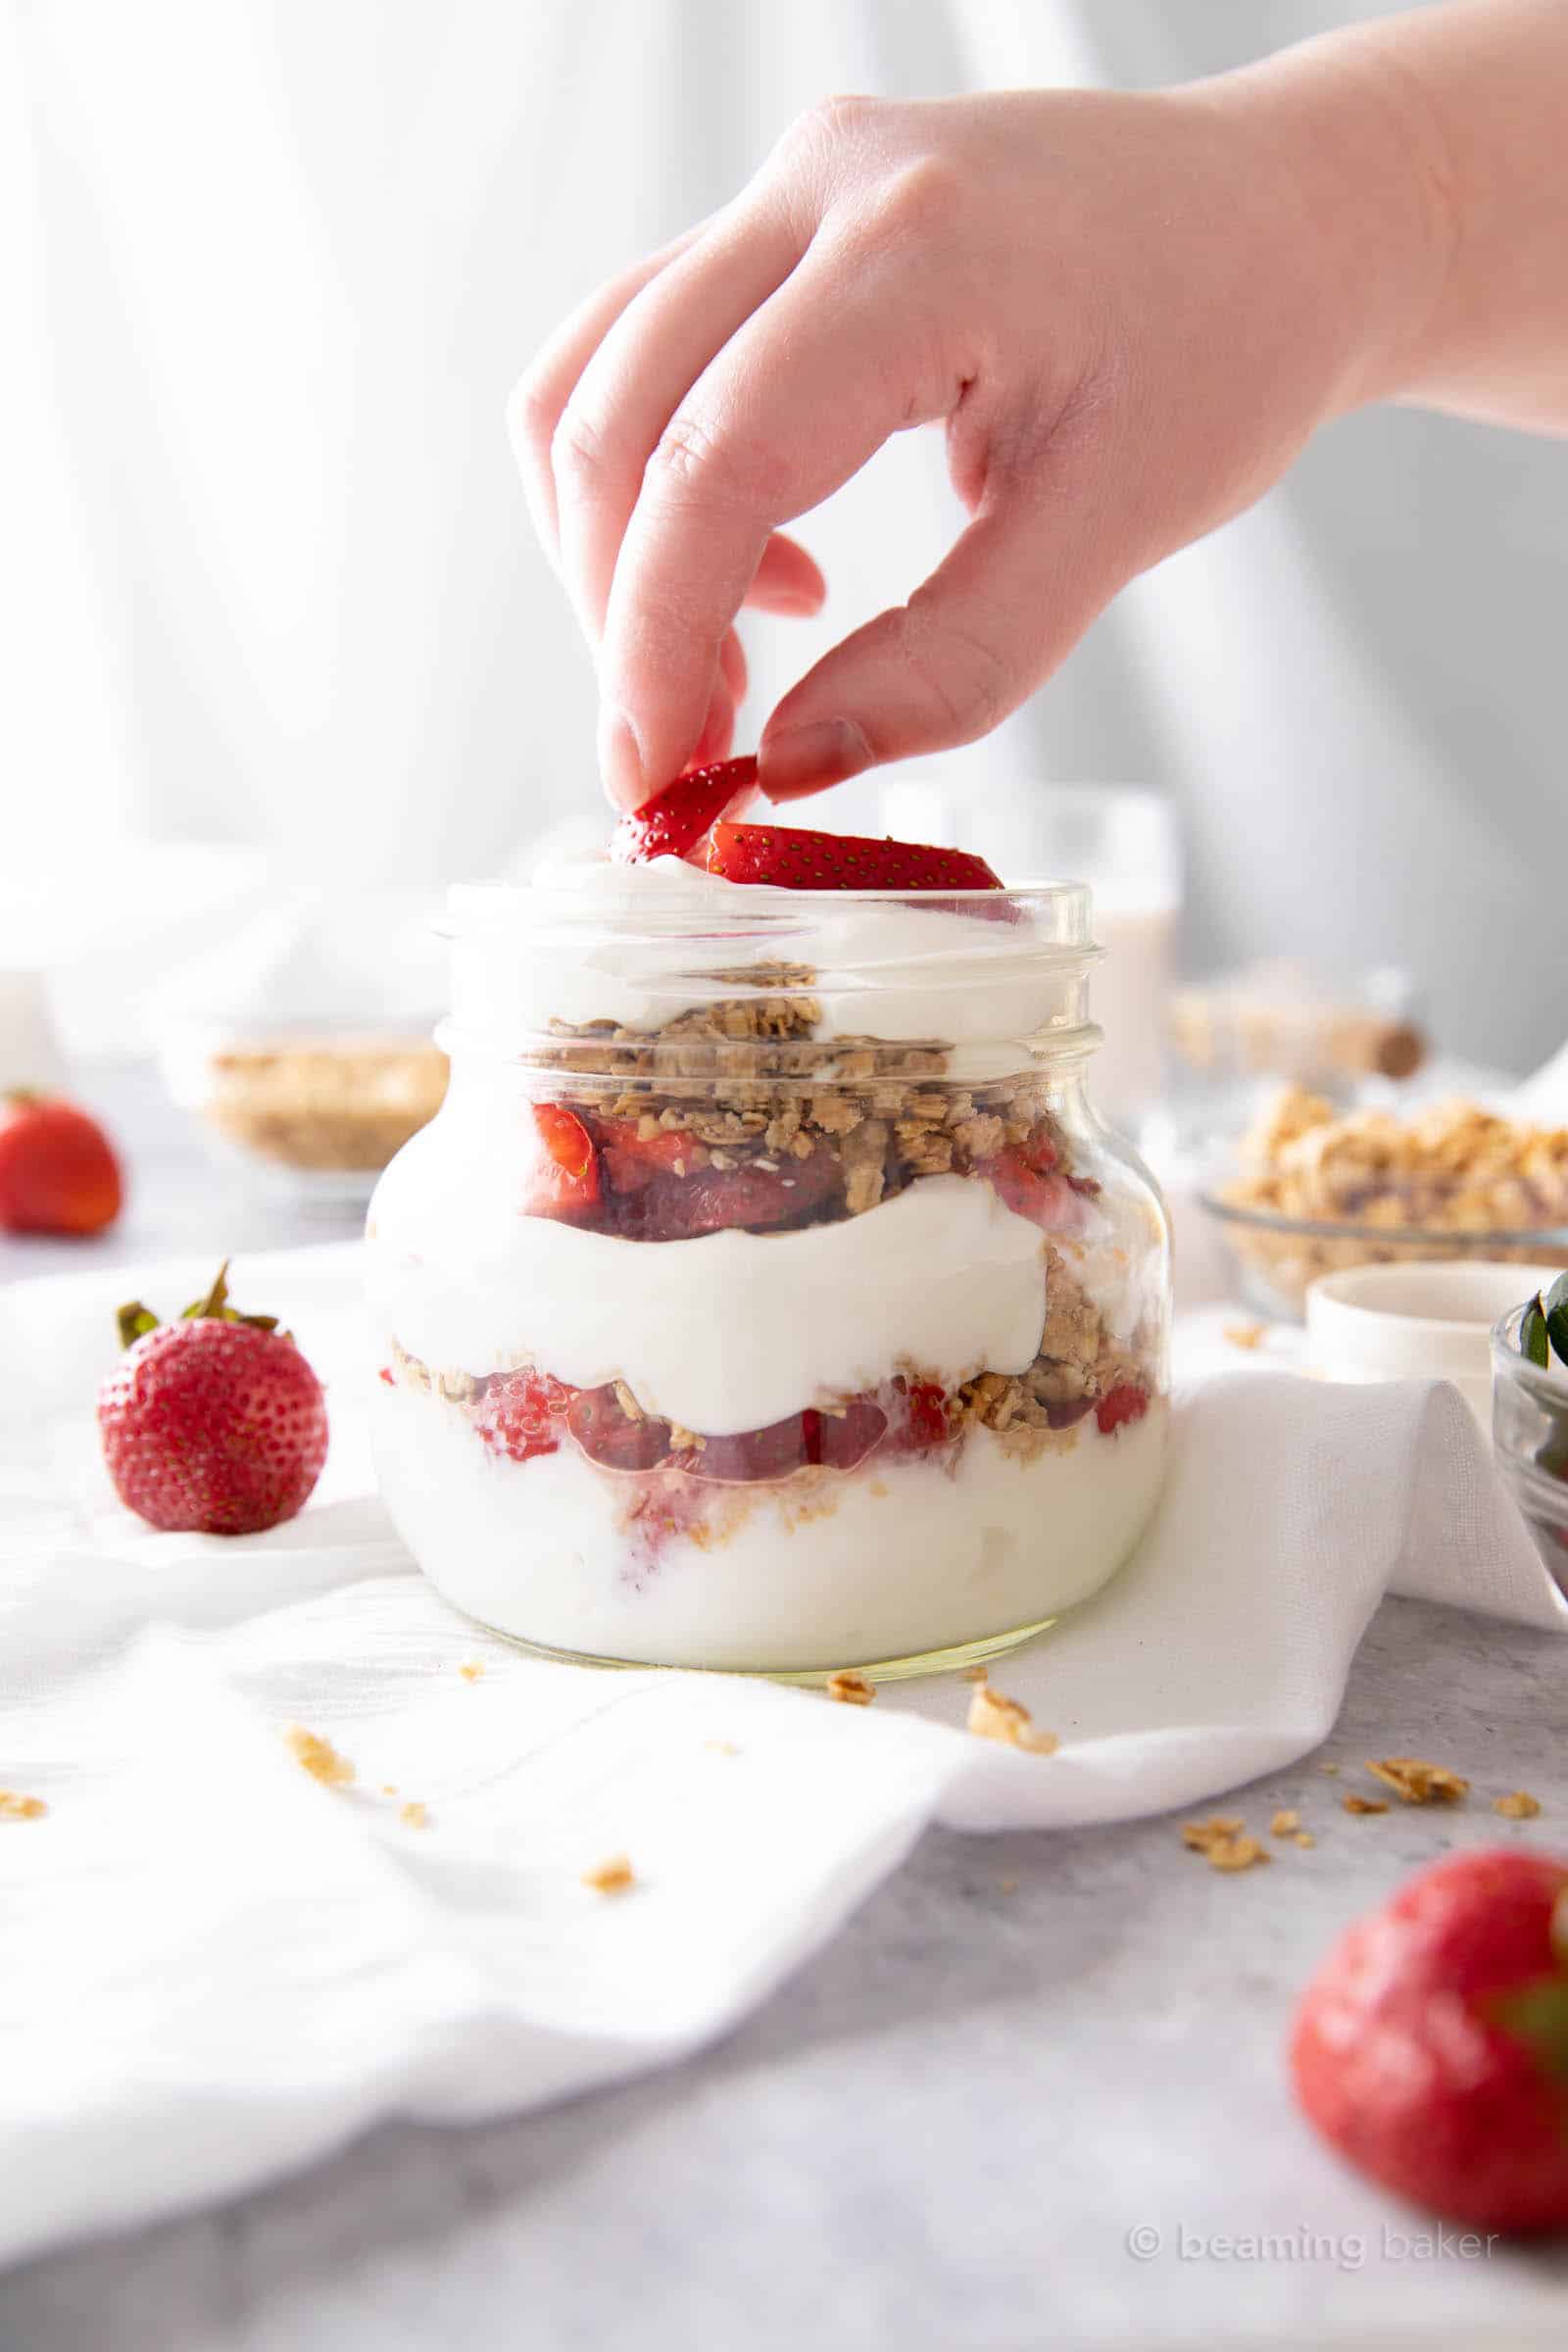 Hand placing a second strawberry slice atop a layer of yogurt in the parfait